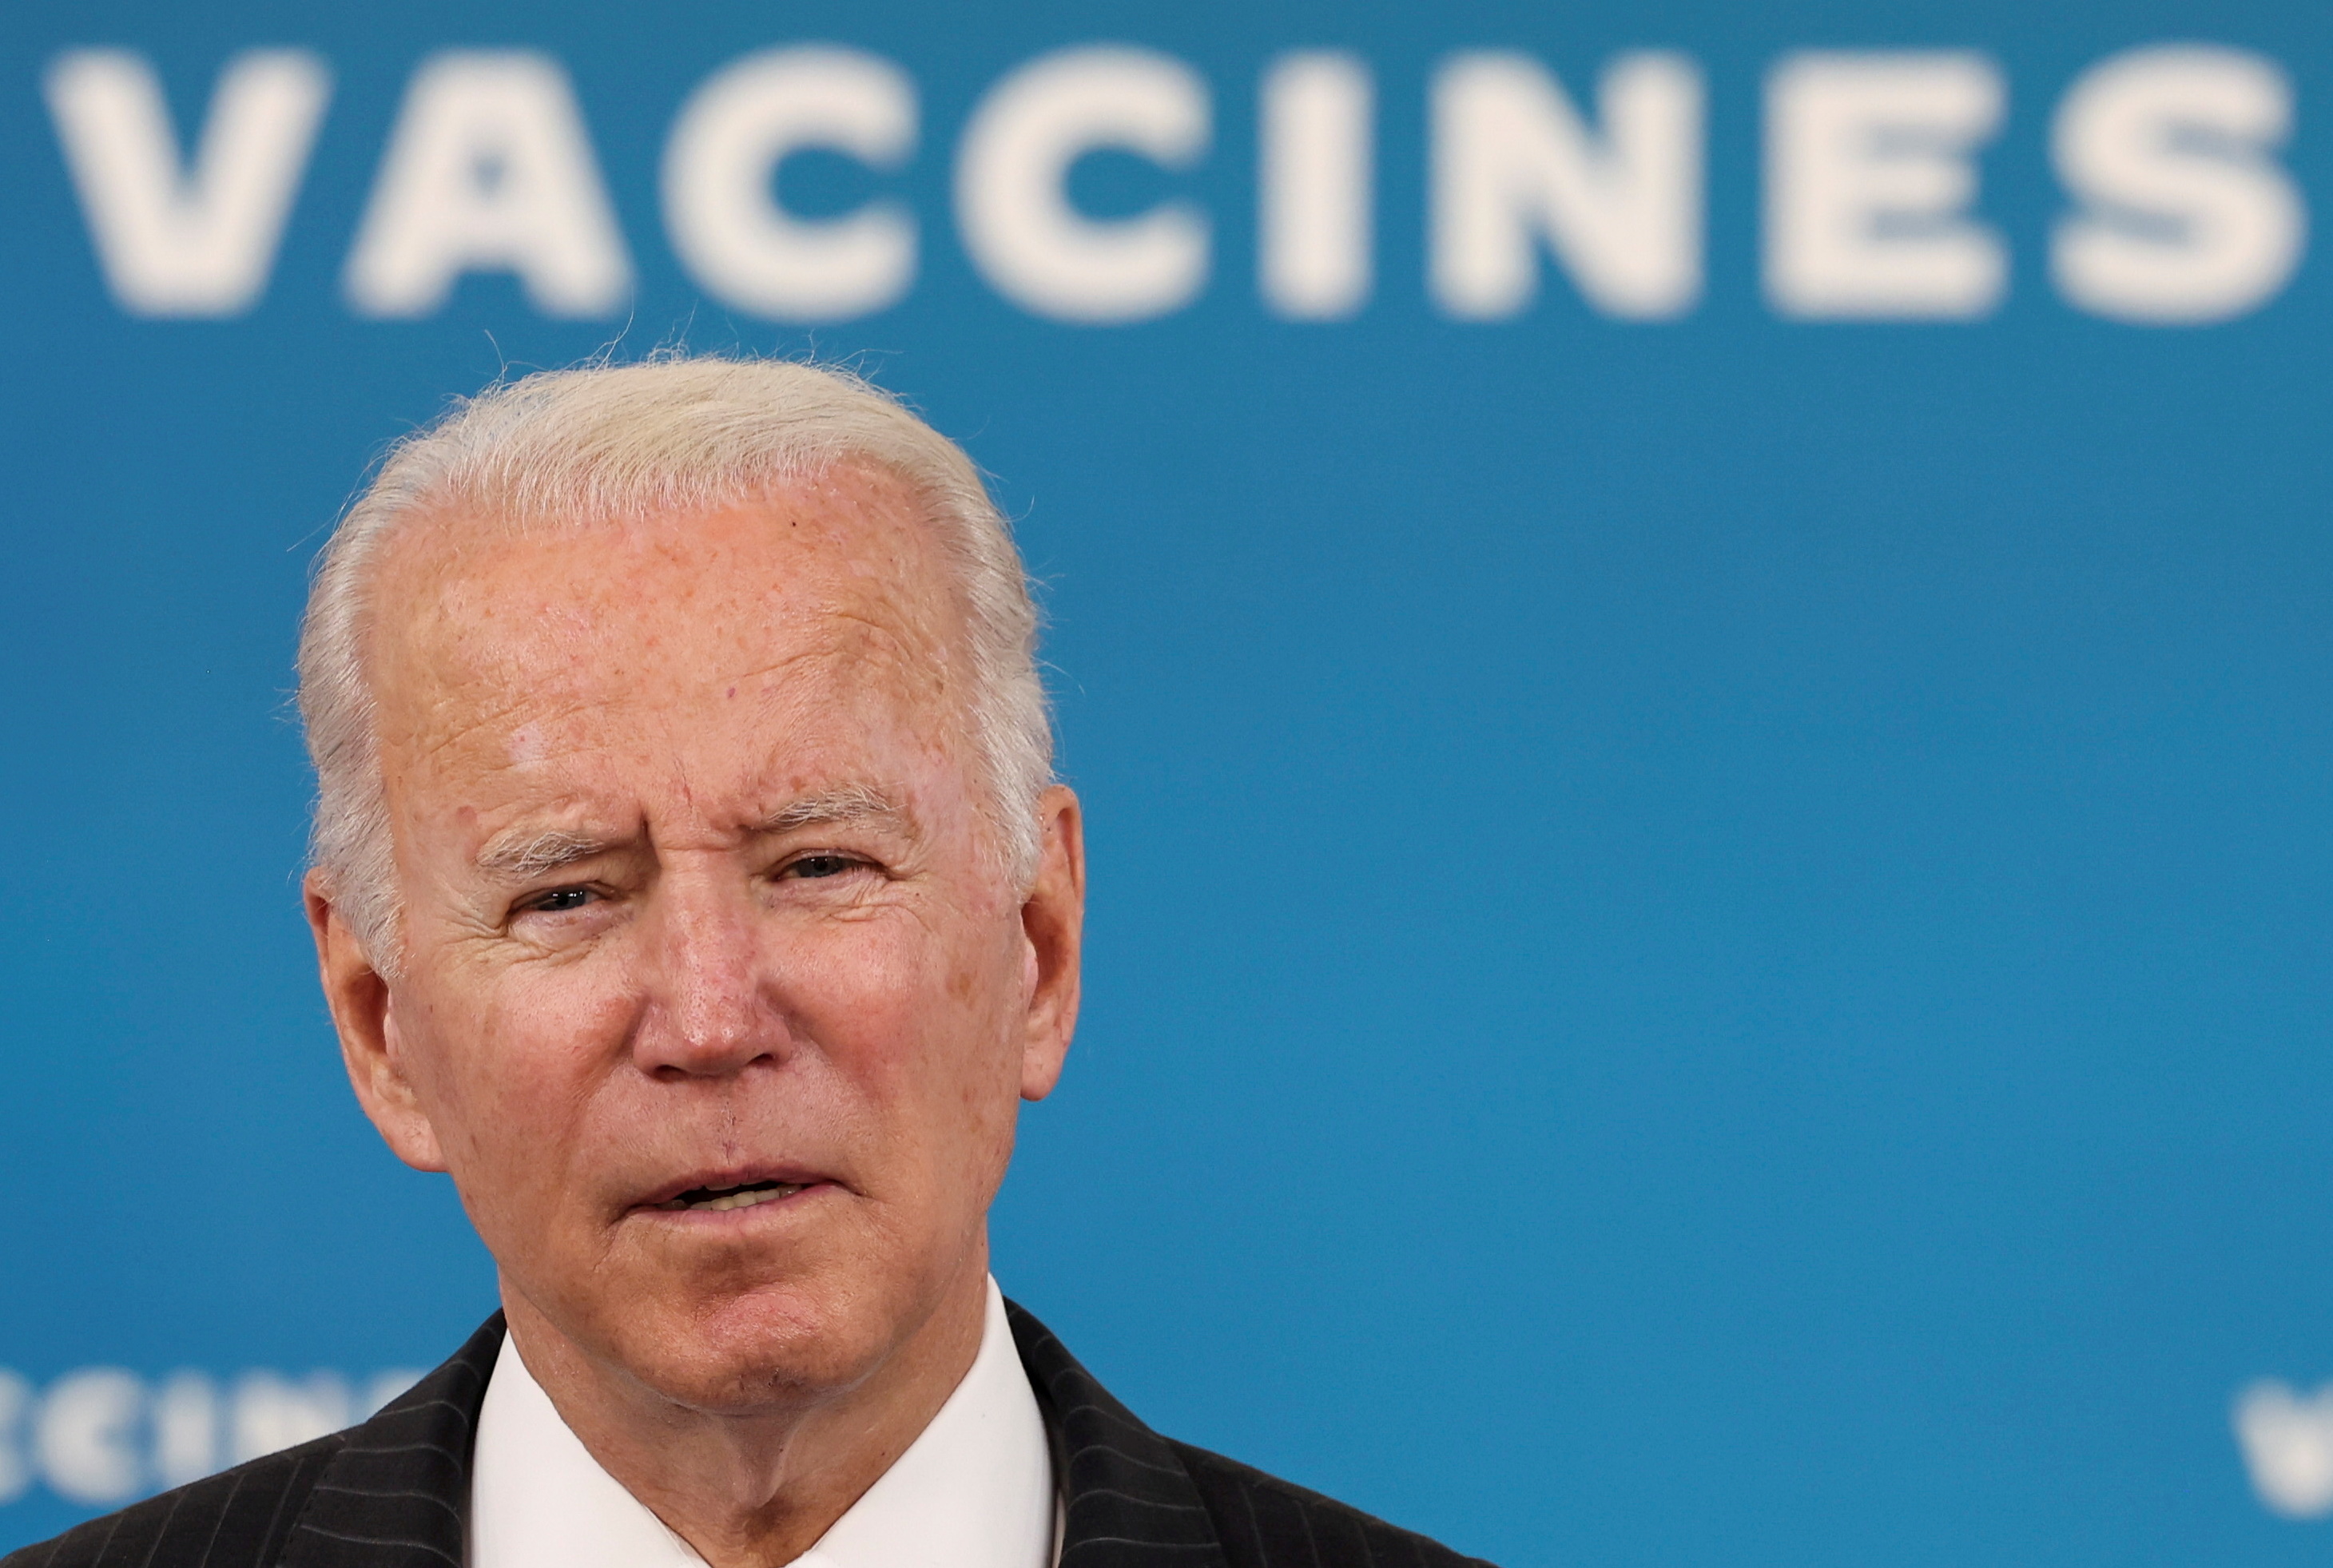 U.S. President Joe Biden delivers remarks on the authorization of the coronavirus disease (COVID-19) vaccine for kids ages 5 to 11, during a speech in the Eisenhower Executive Office Building’s South Court Auditorium at the White House in Washington, U.S., November 3, 2021. REUTERS/Evelyn Hockstein